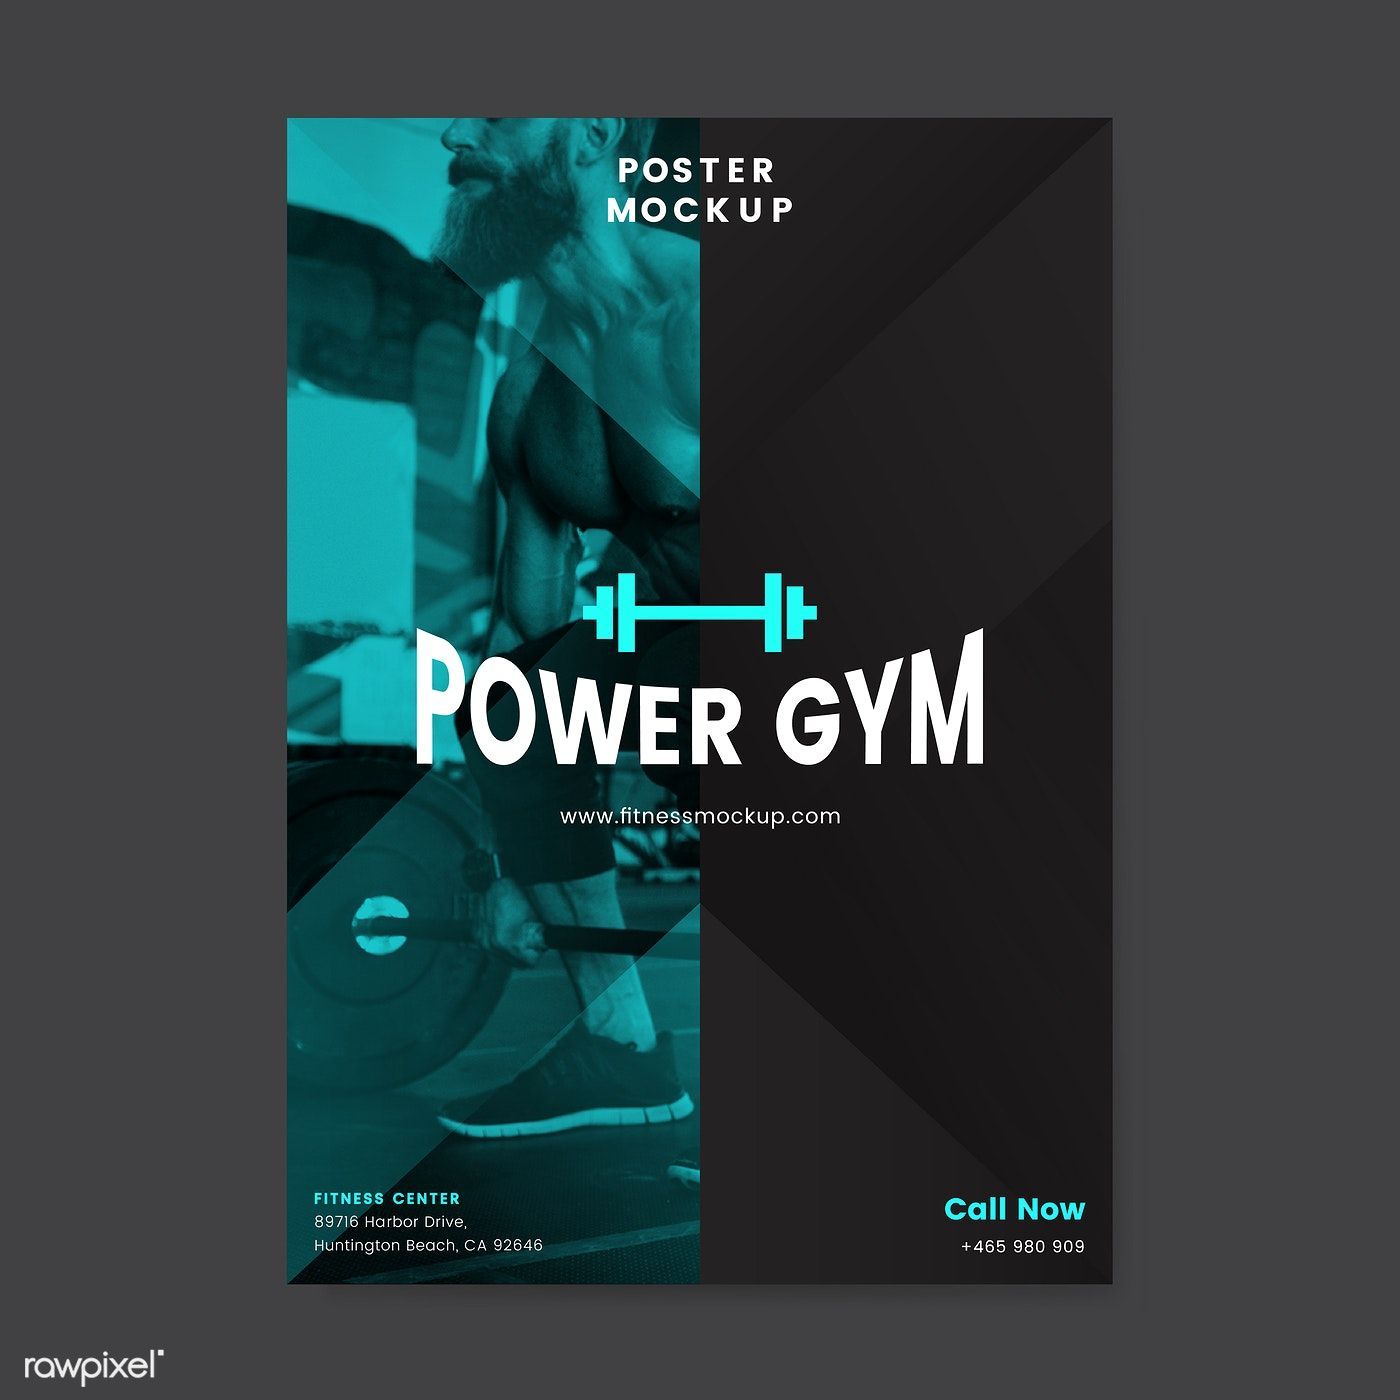 Download free vector of Power gym promotional poster vector 533042 - Download free vector of Power gym promotional poster vector 533042 -   12 fitness Poster vector ideas